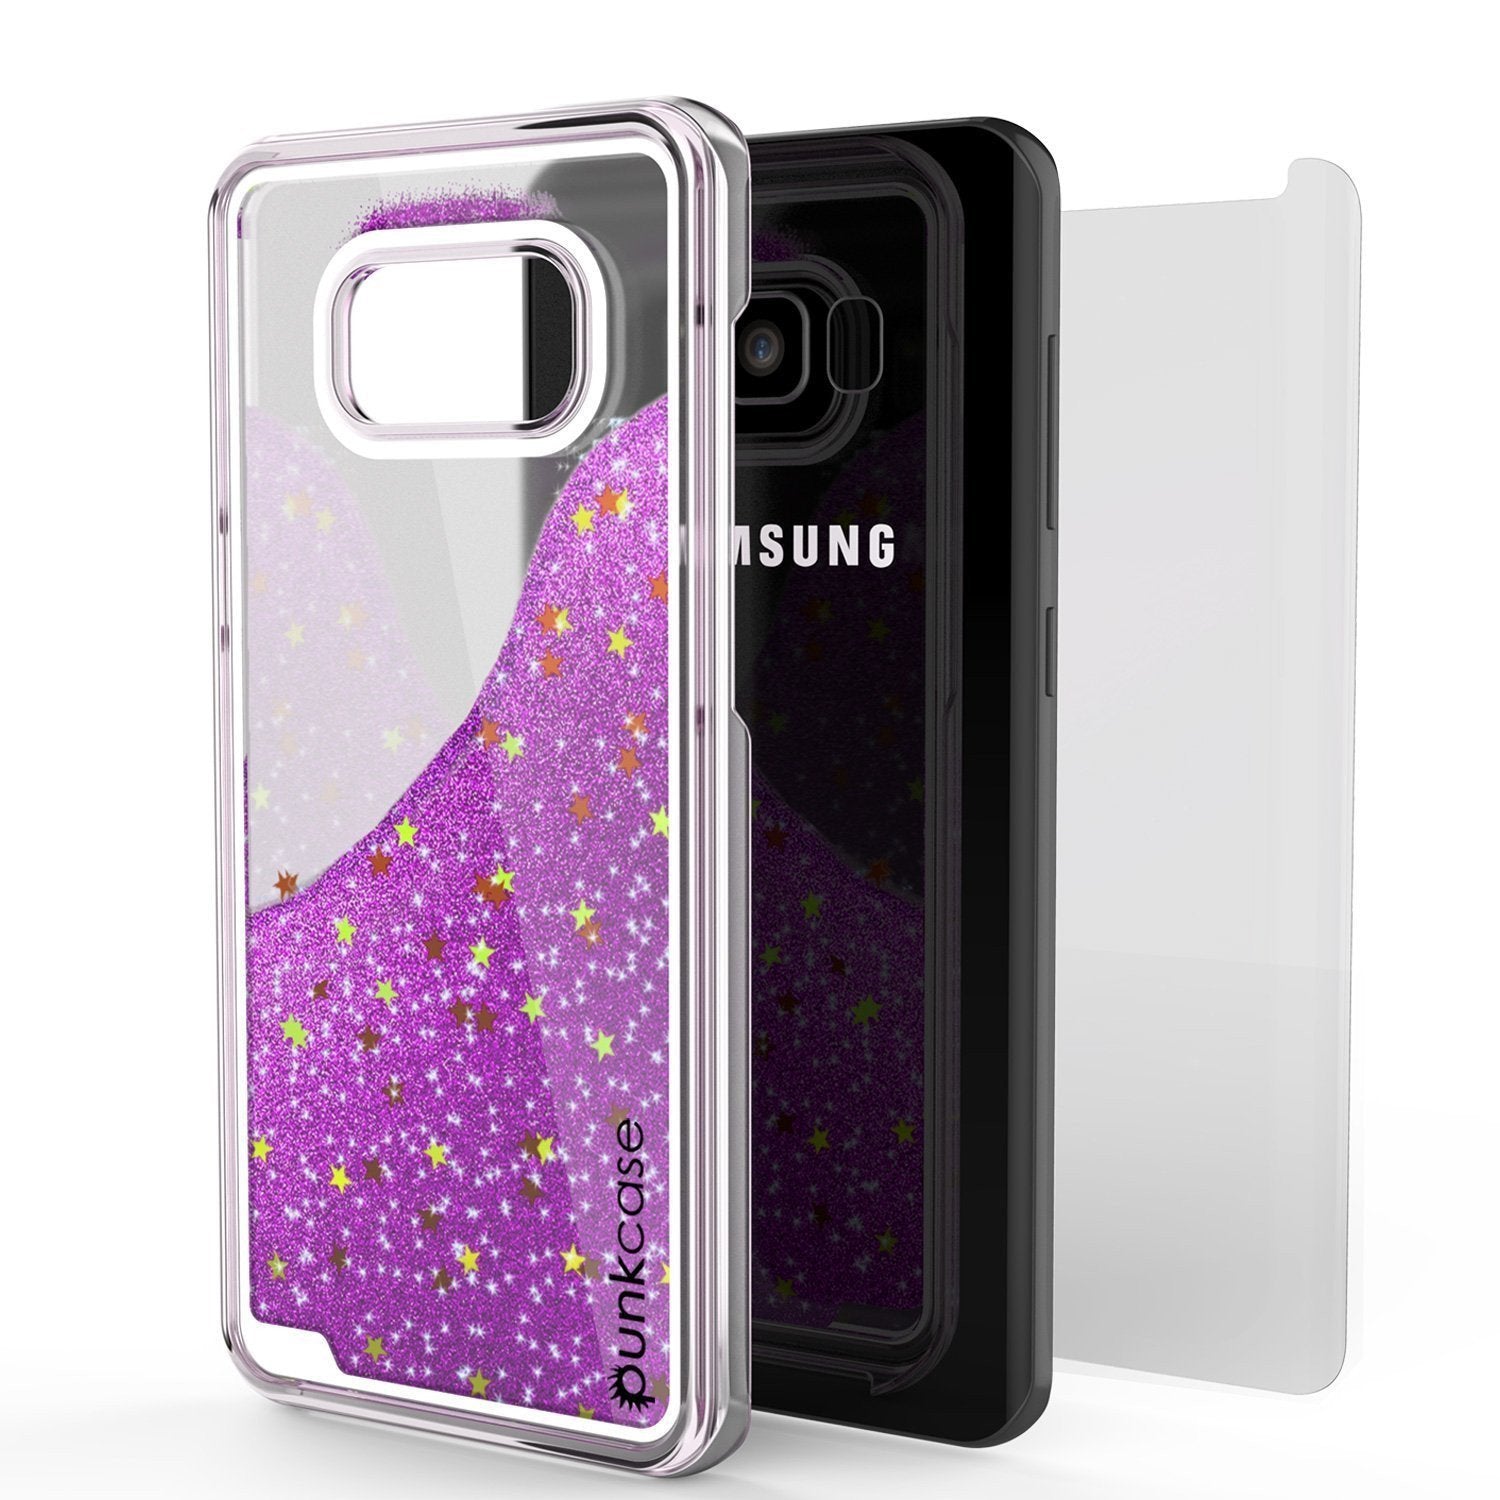 Galaxy S8 Case, Punkcase [Liquid Series] Protective Dual Layer Floating Glitter Cover with lots of Bling & Sparkle + PunkShield Screen Protector for Samsung S8 [Purp - PunkCase NZ